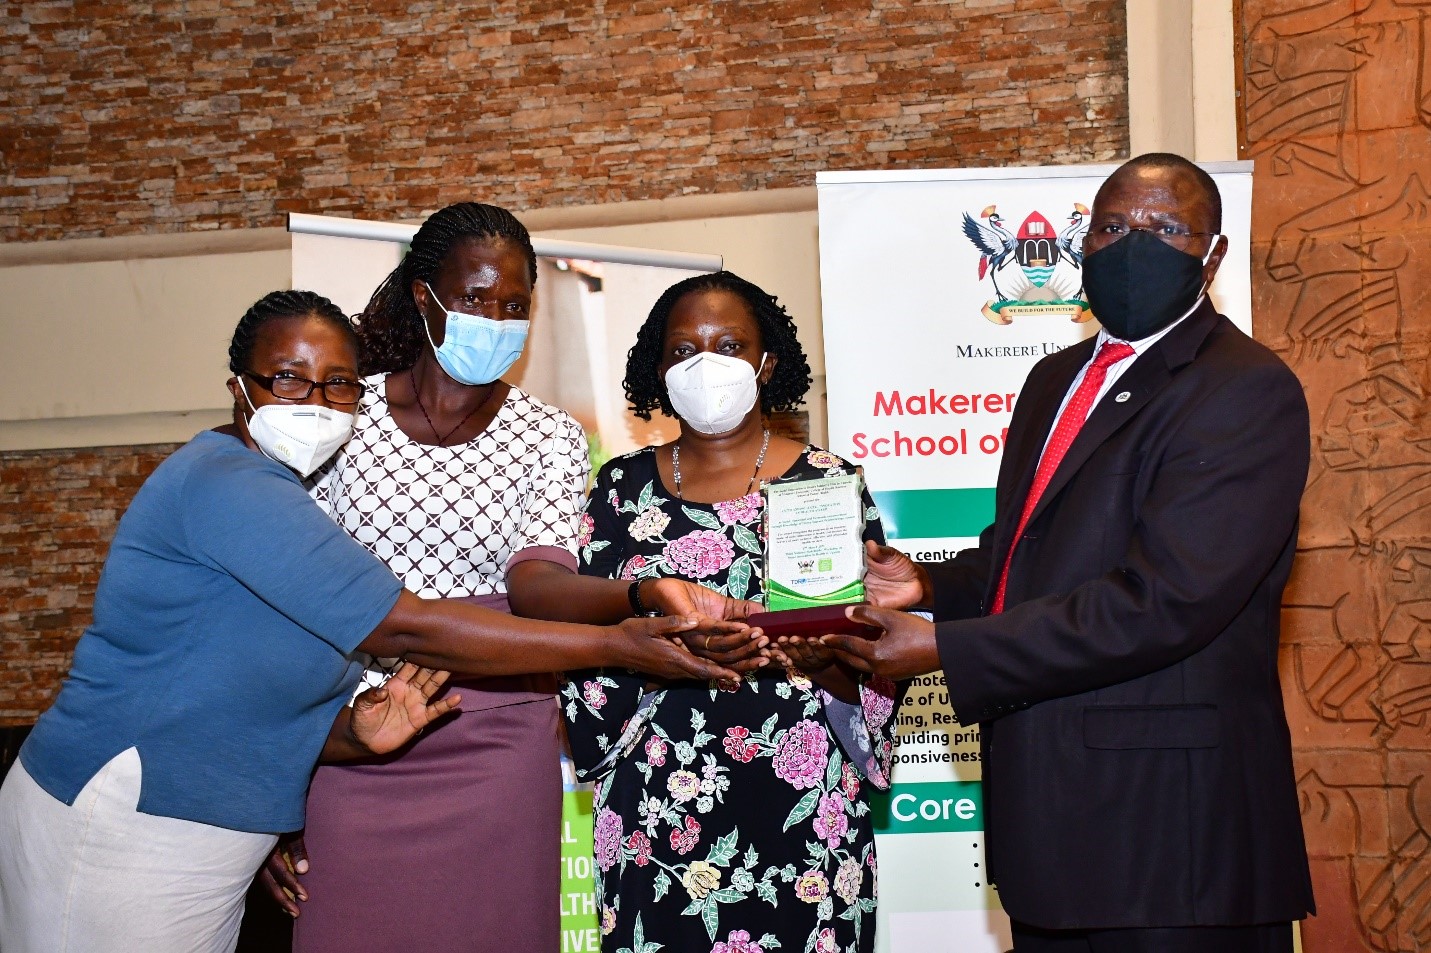 Dr. Maxwell Otim Onapa, the Director of Science, Research and Innovation at Ministry of Science, Technology and Innovation hands over a plaque to Dr. Etheldreda Nakimuli and her team at SEEK-GSP project. Their project aimed at narrowing the treatment gap for depression among people living with HIV using group support psychotherapy delivered by community health workers. They are among the winners of the 2020 Social Innovations in Health Awards organized by the School of Public Health. 